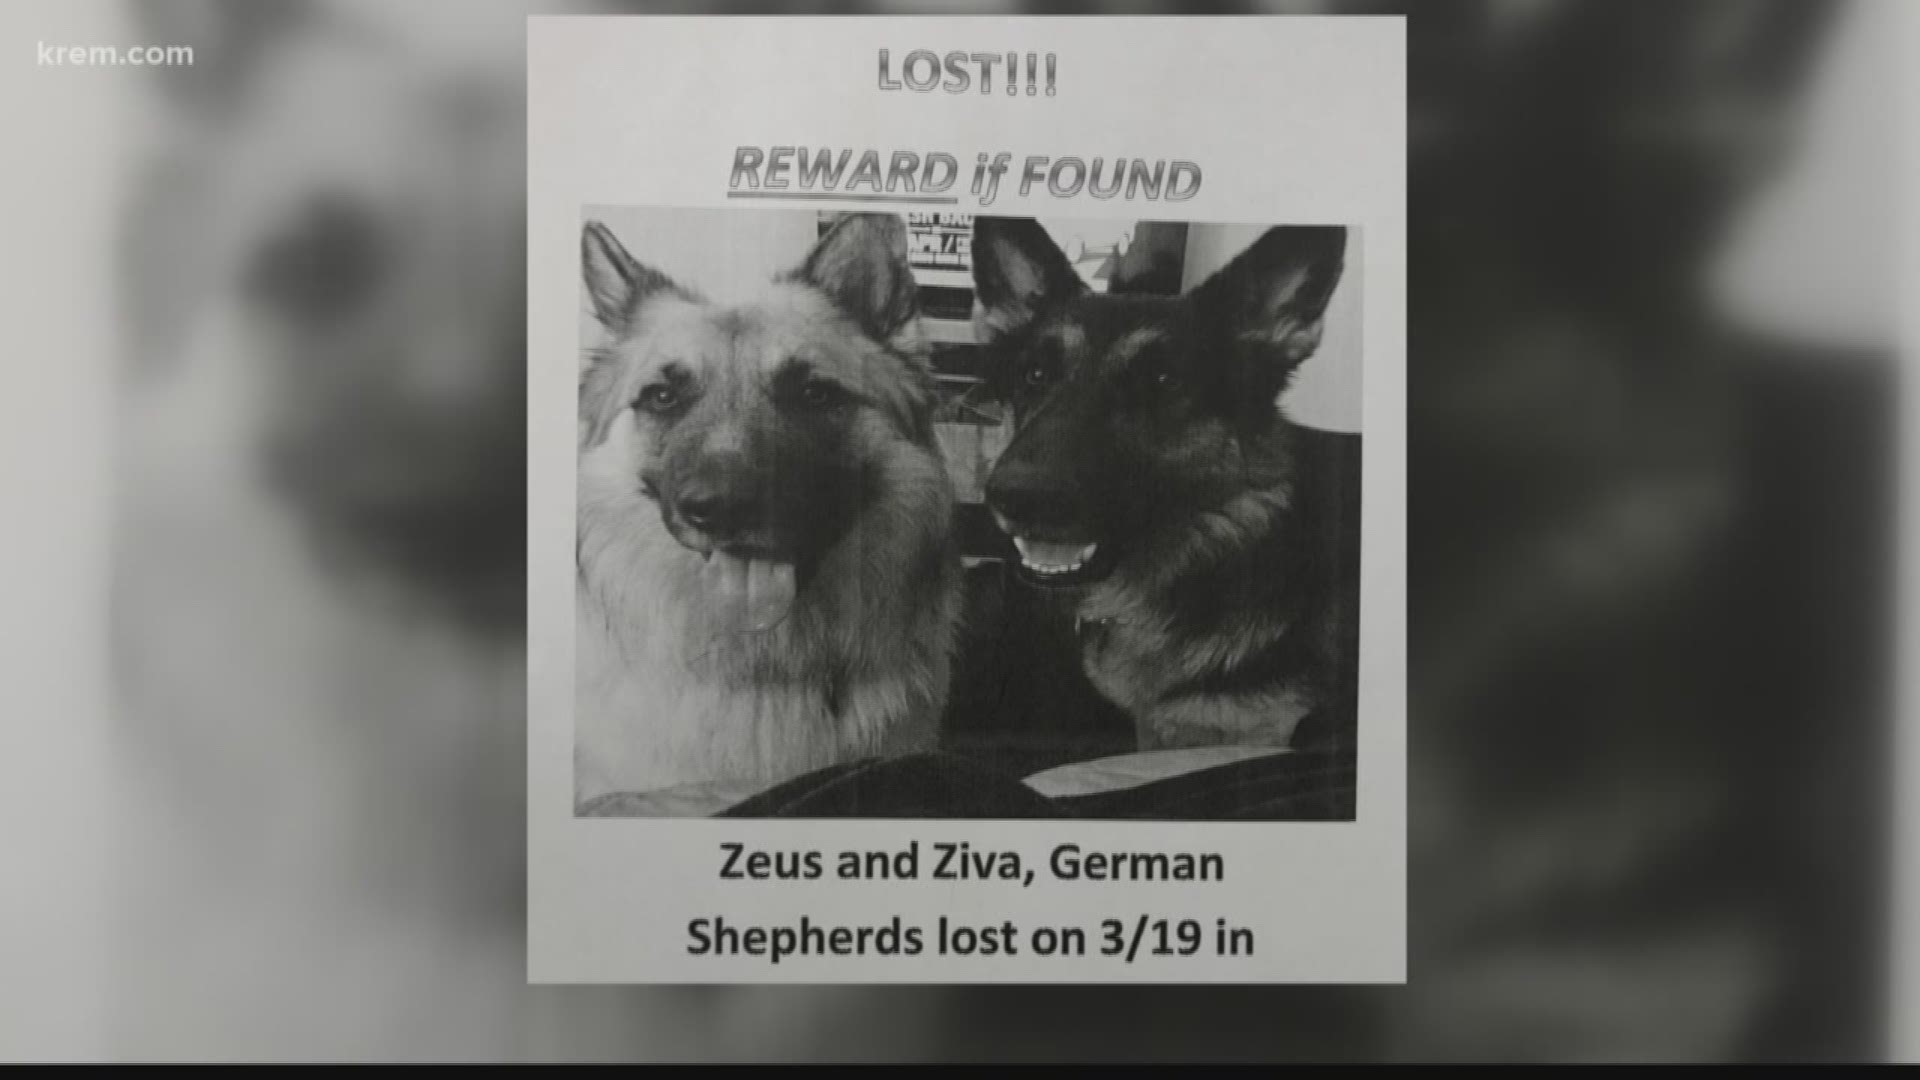 Two dogs disappeared from their family's backyard three weeks ago. Turns out they were trapped underground in an old missile silo and their owners never gave up hope of finding them. (4-11-18)